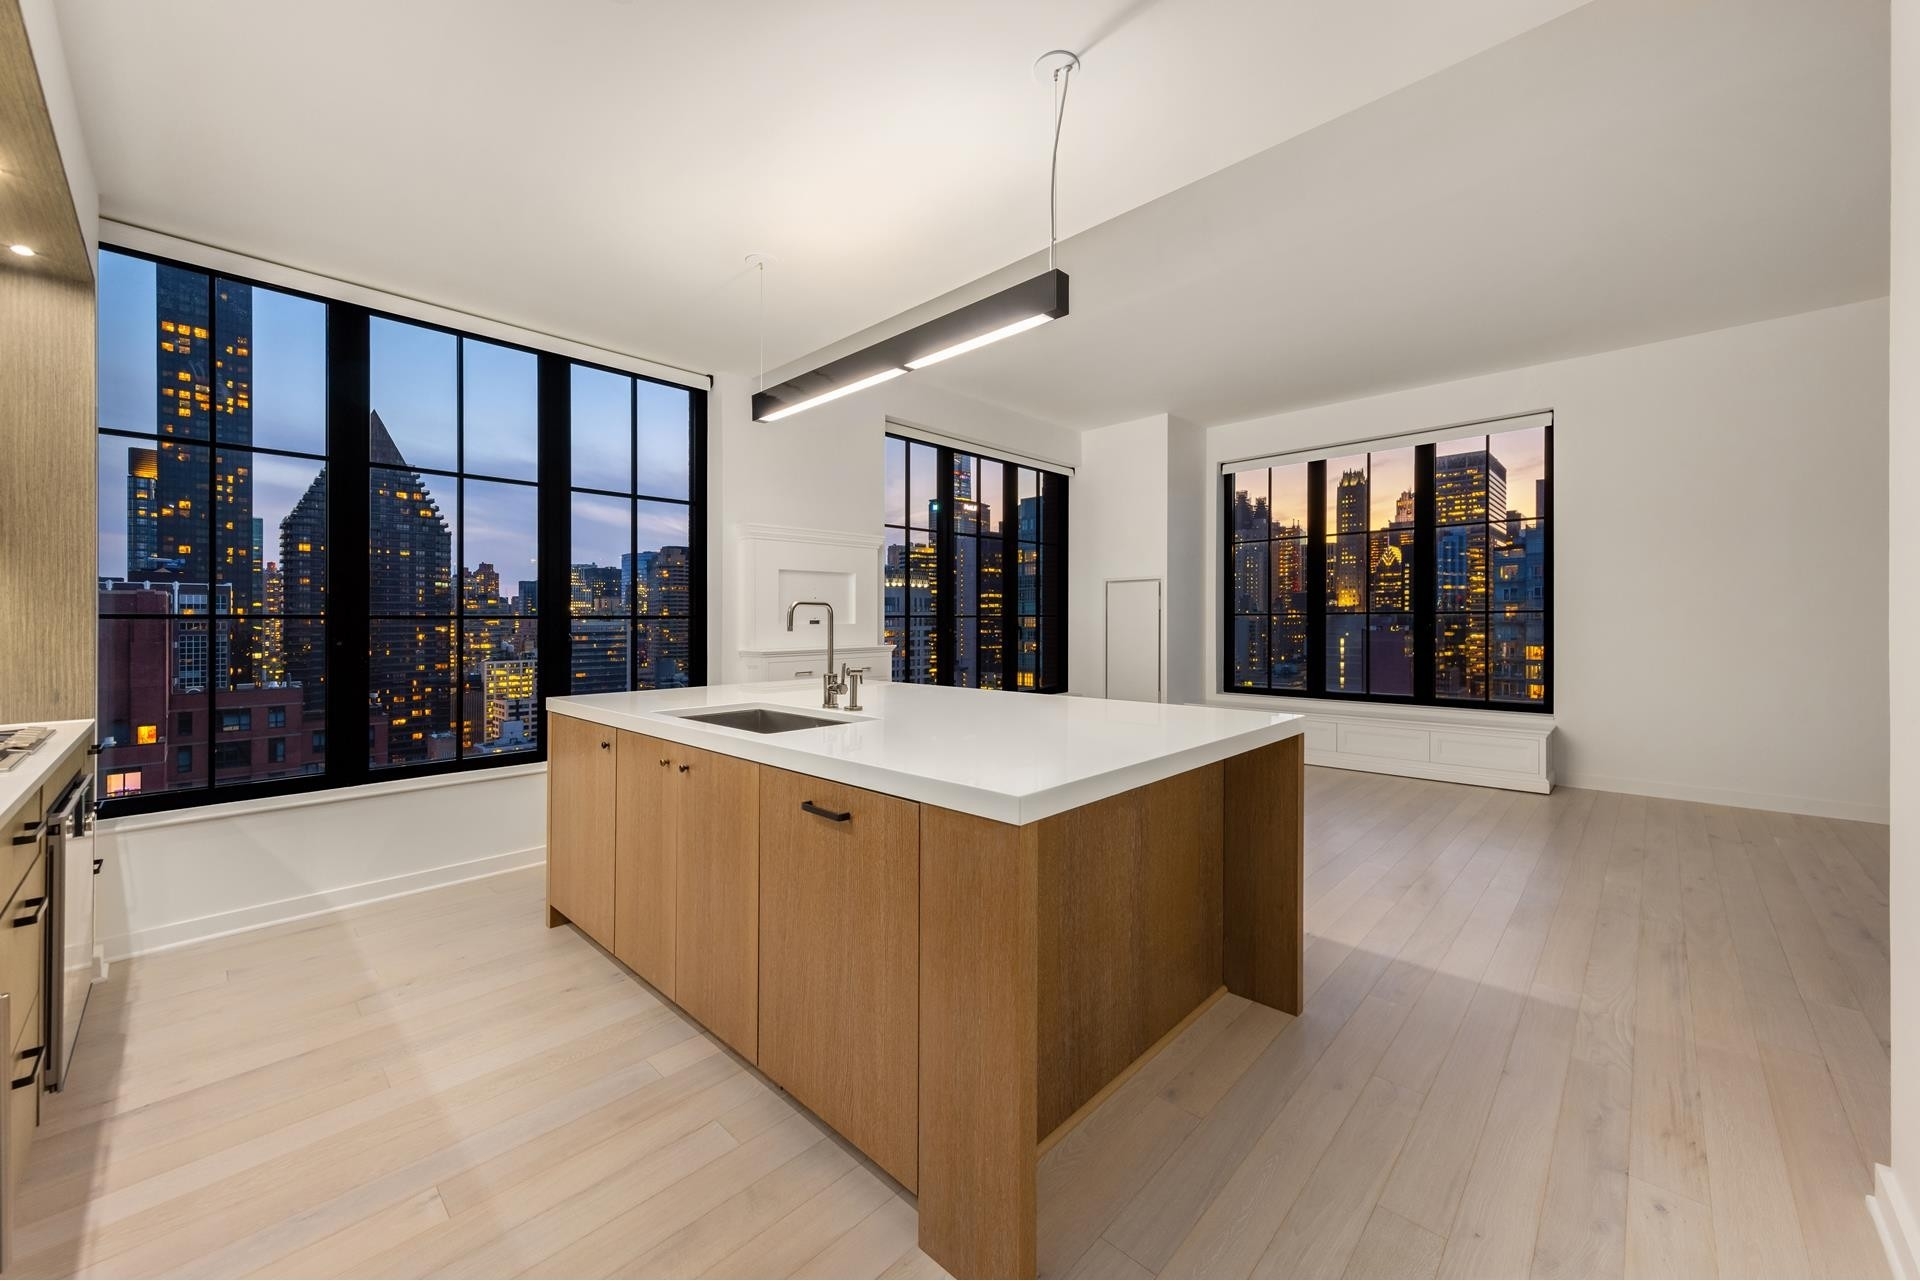 Property at The Sutton, 959 FIRST AVE, 25A Turtle Bay, New York, New York 10022